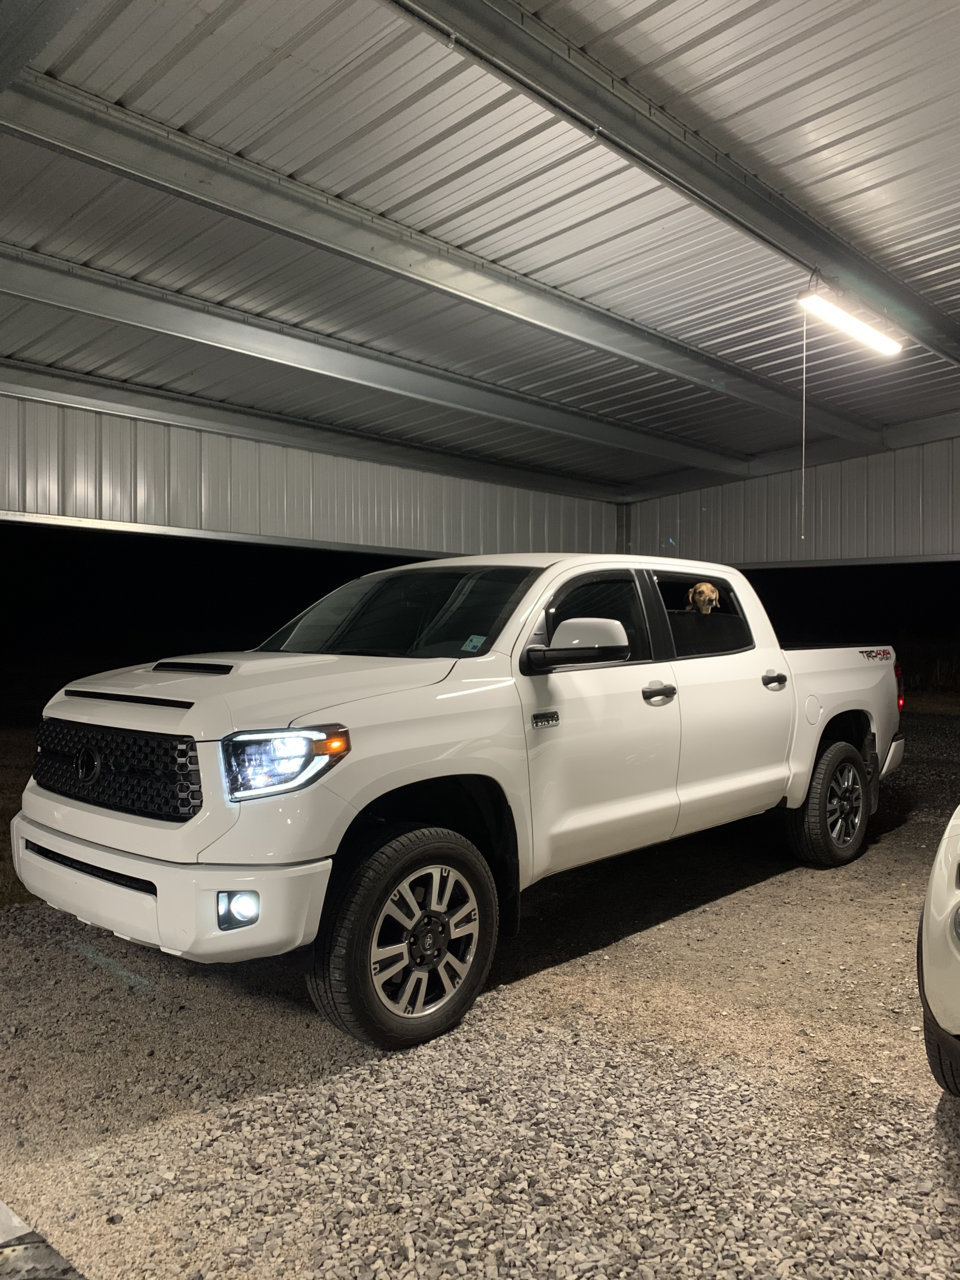 What have you done to your 3rd gen Tundra today? | Page 1710 | Toyota